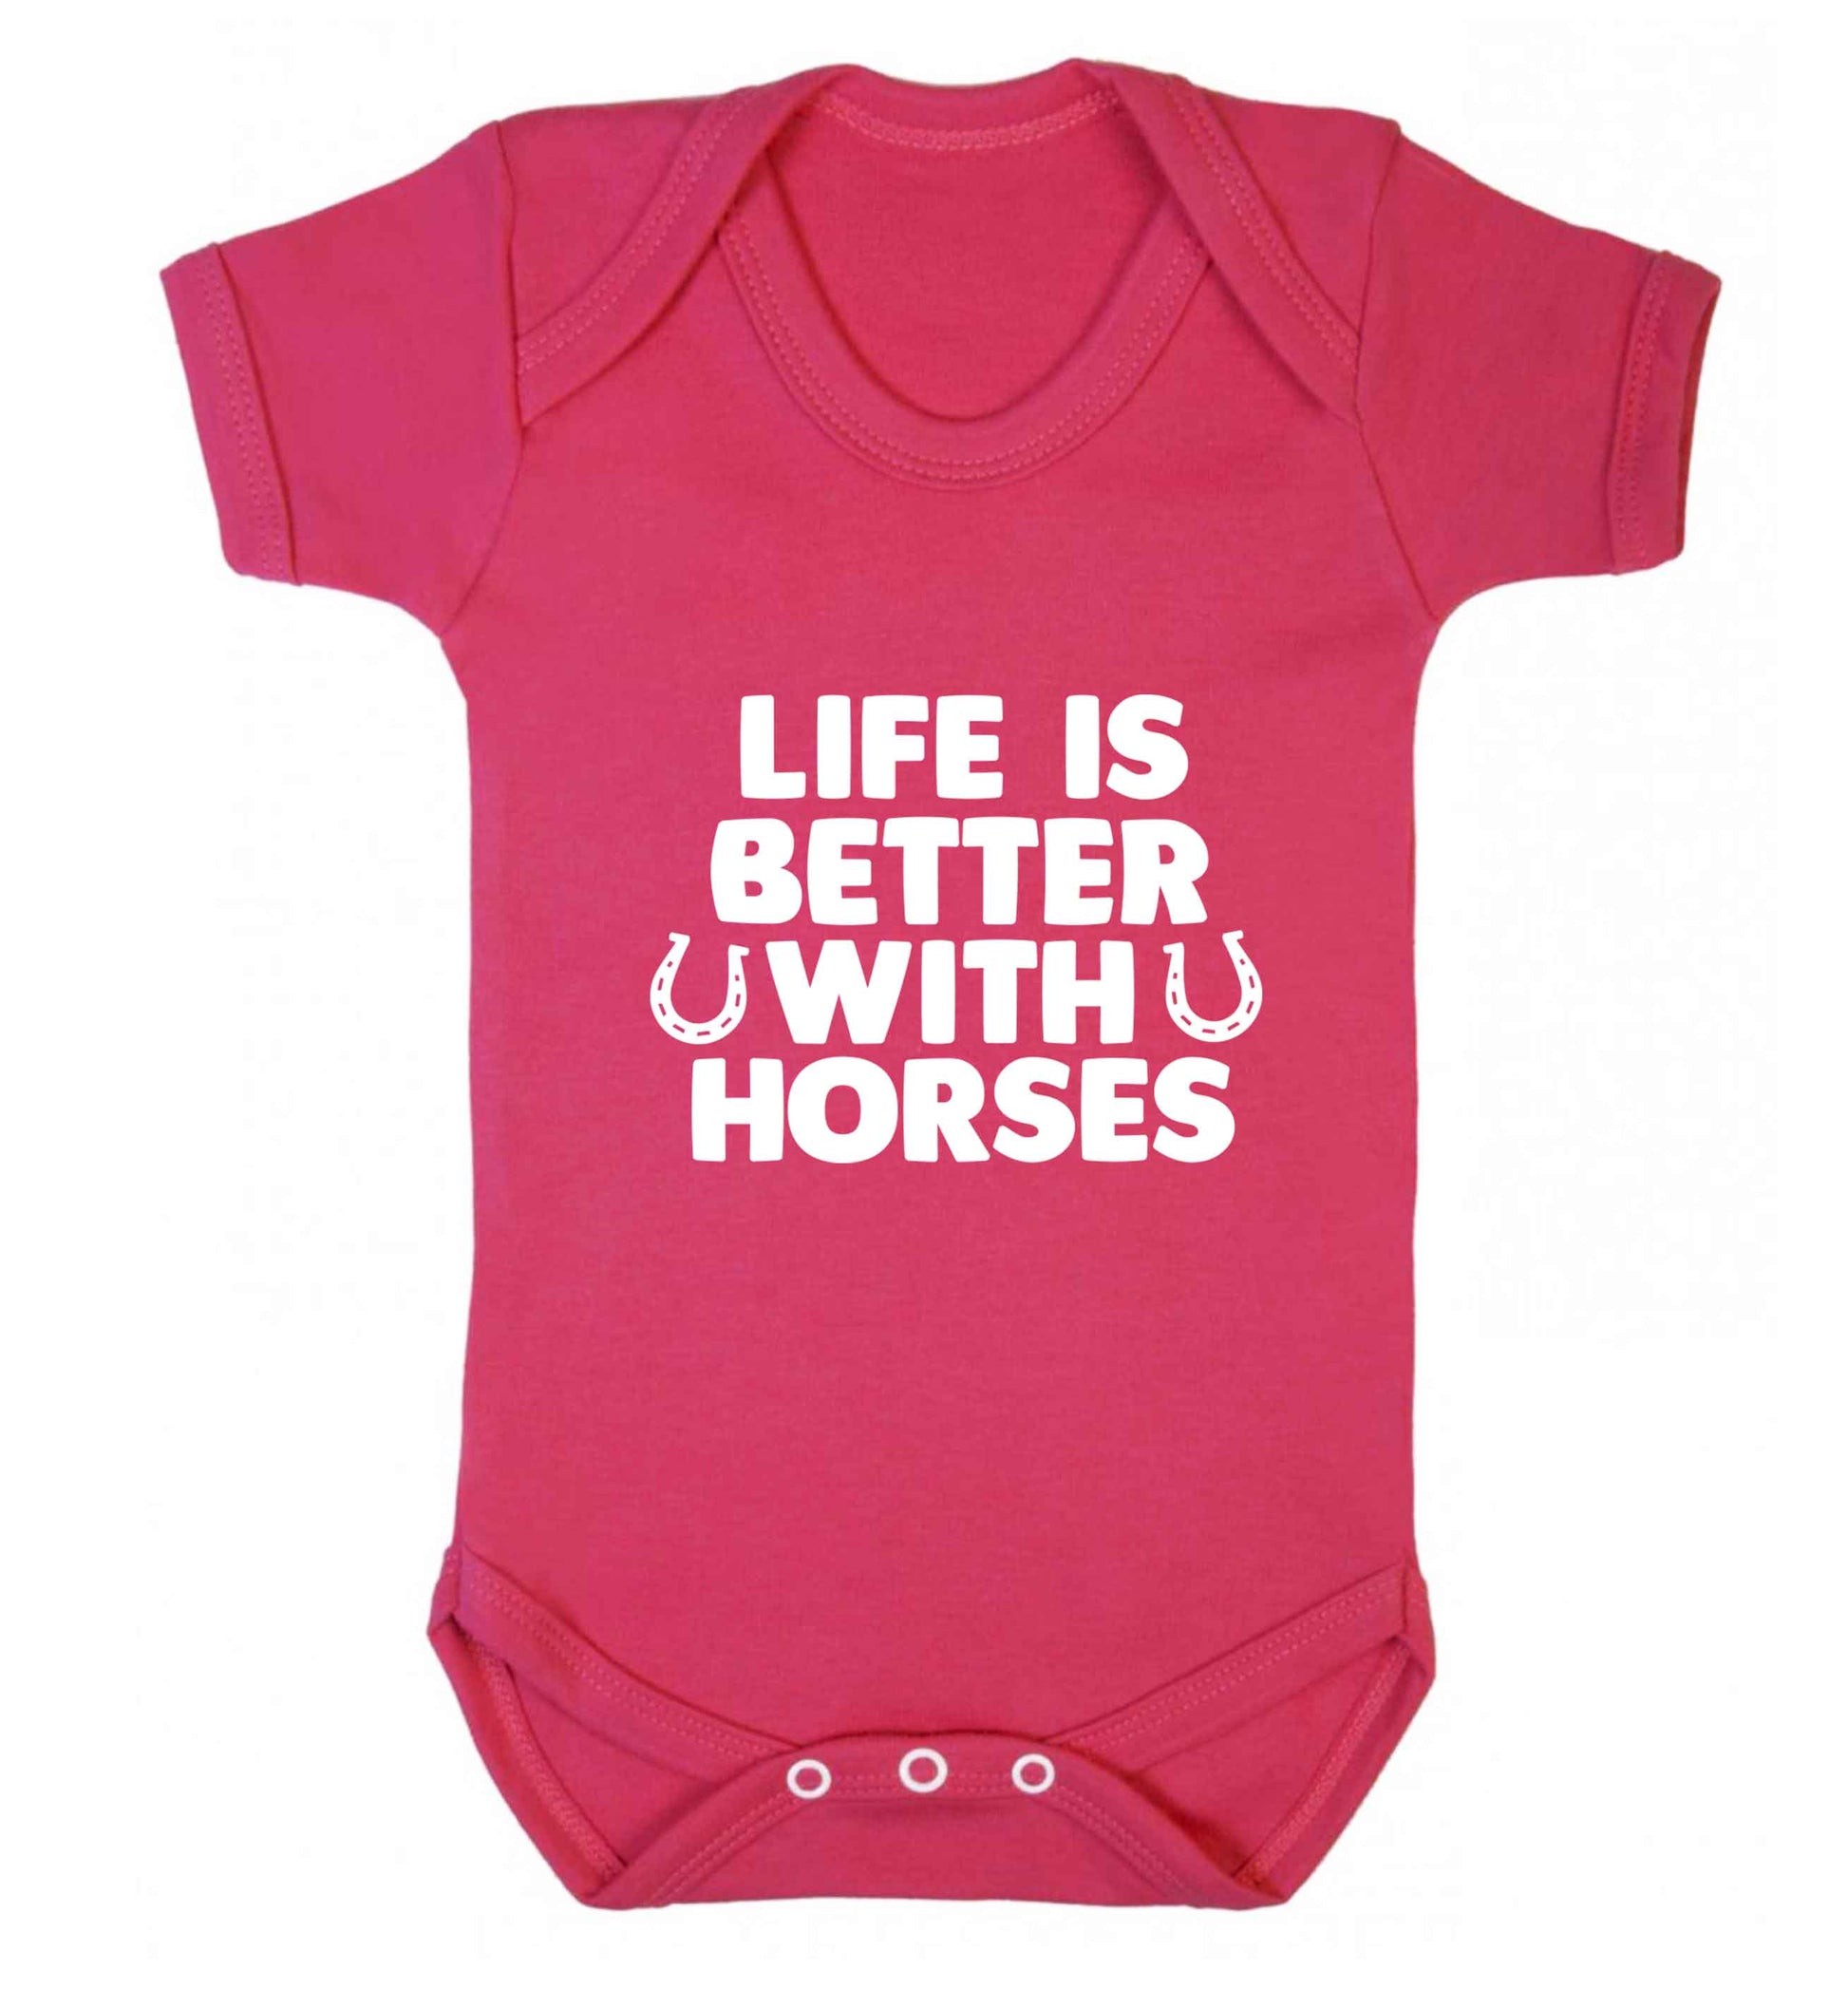 Life is better with horses baby vest dark pink 18-24 months